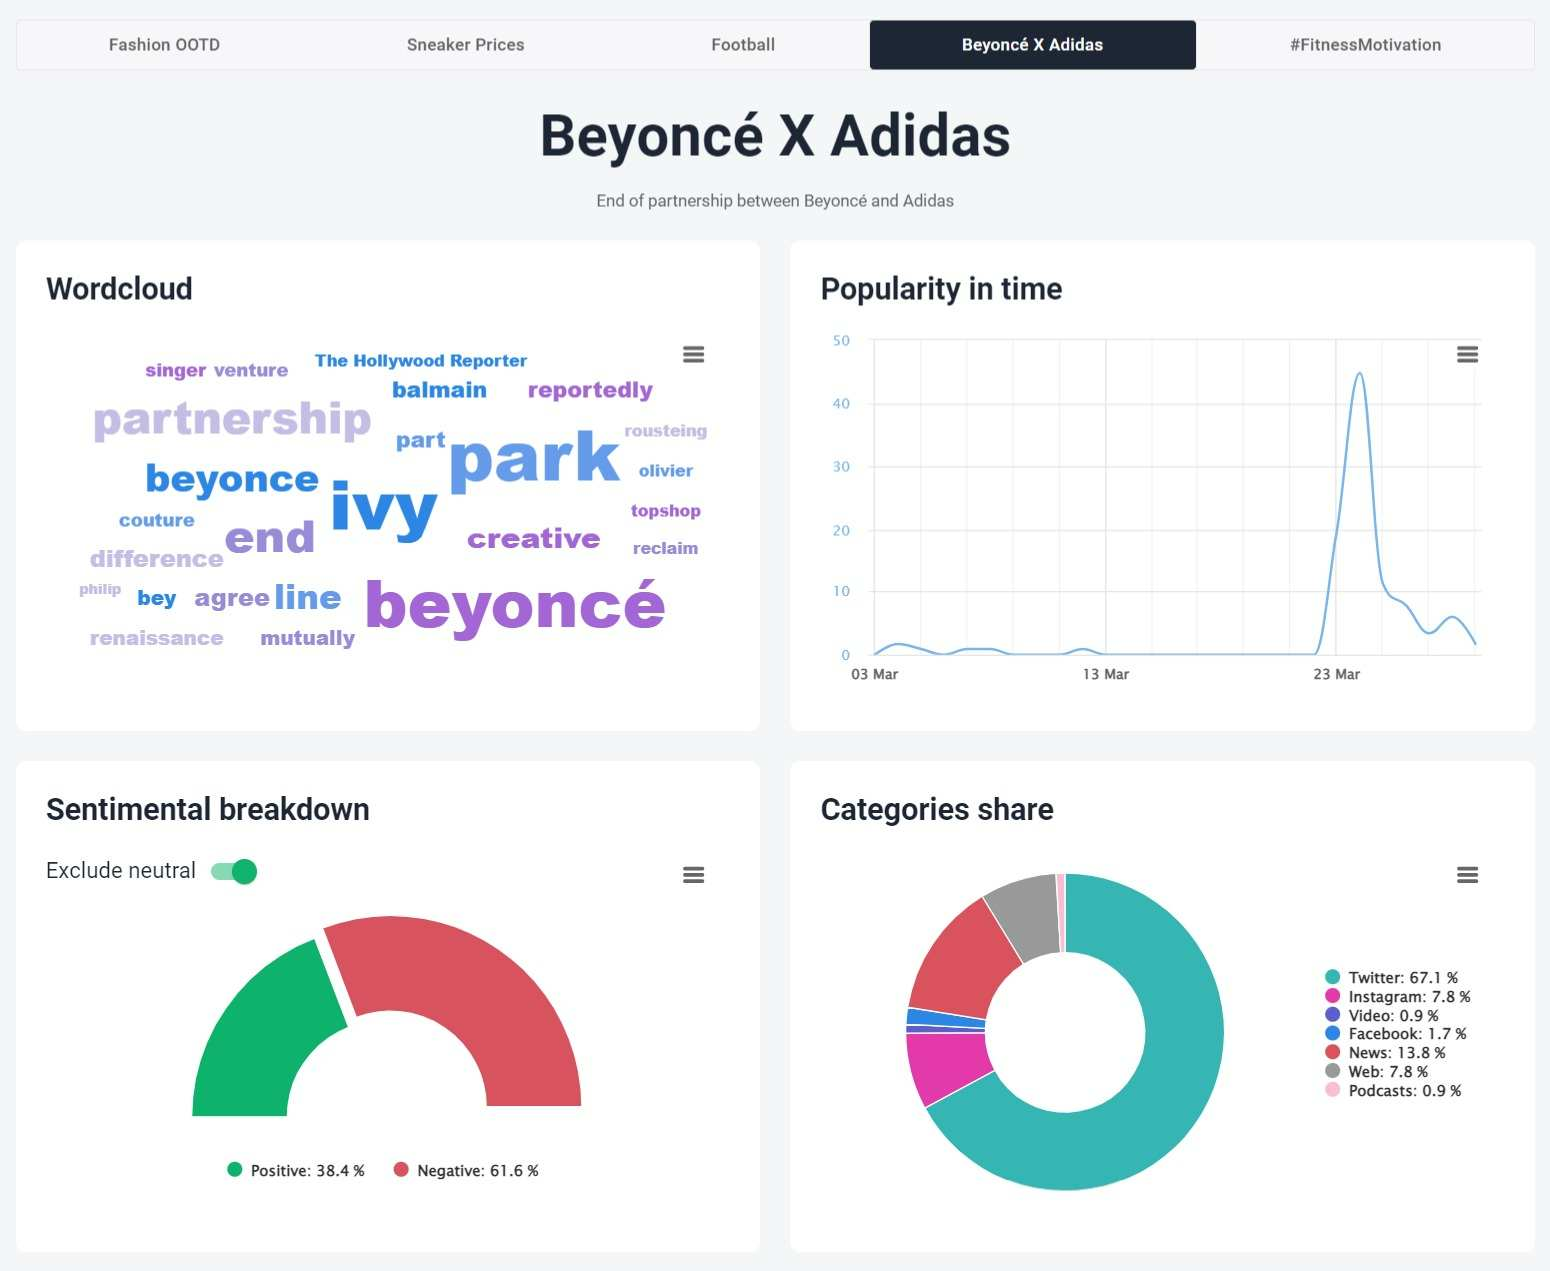 Topic Modeling feature by the Brand24 tool detected customer insights for the Adidas brand